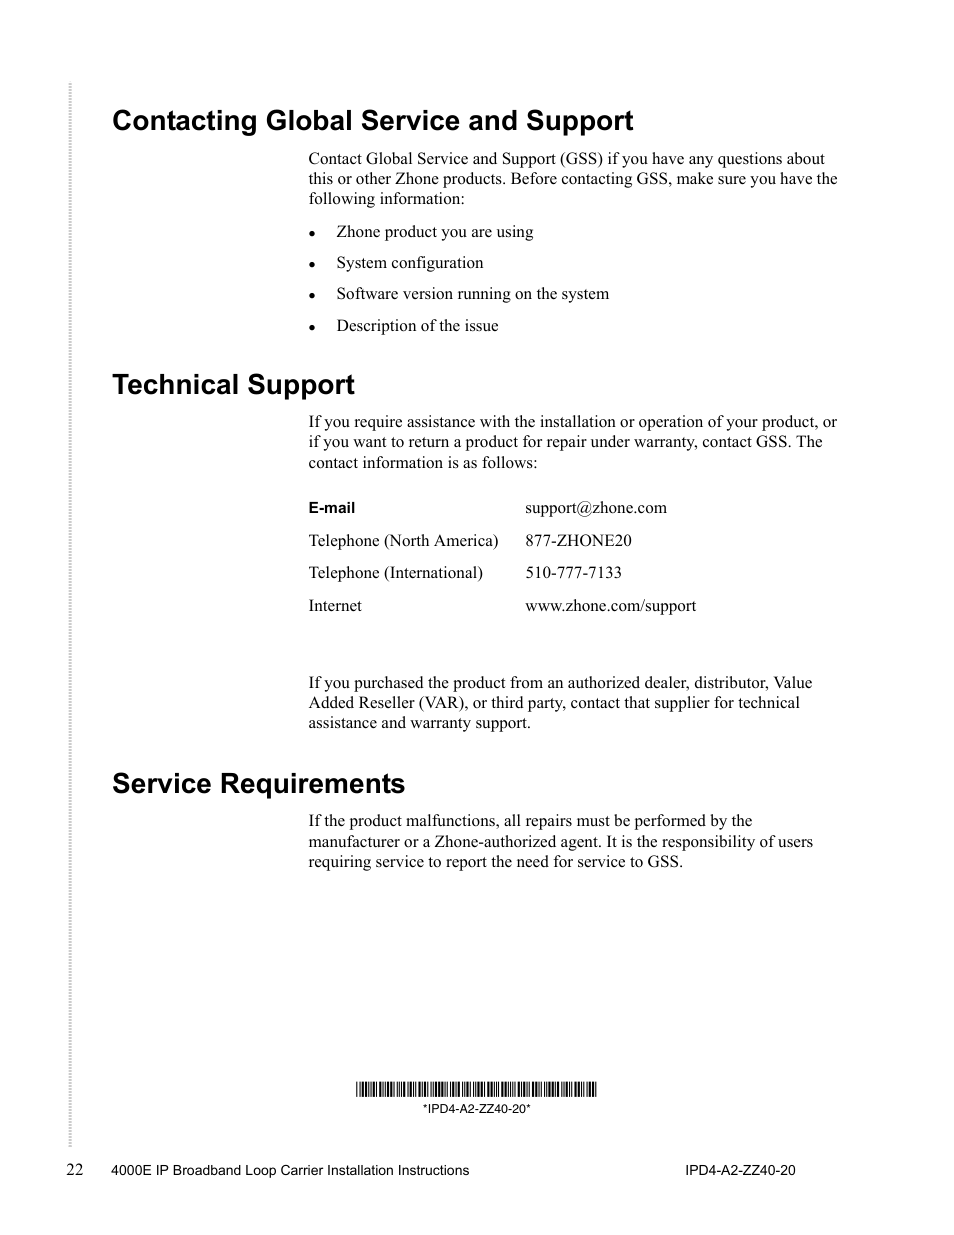 Contacting global service and support, Technical support, Service requirements | Zhone Technologies 4000E User Manual | Page 22 / 22